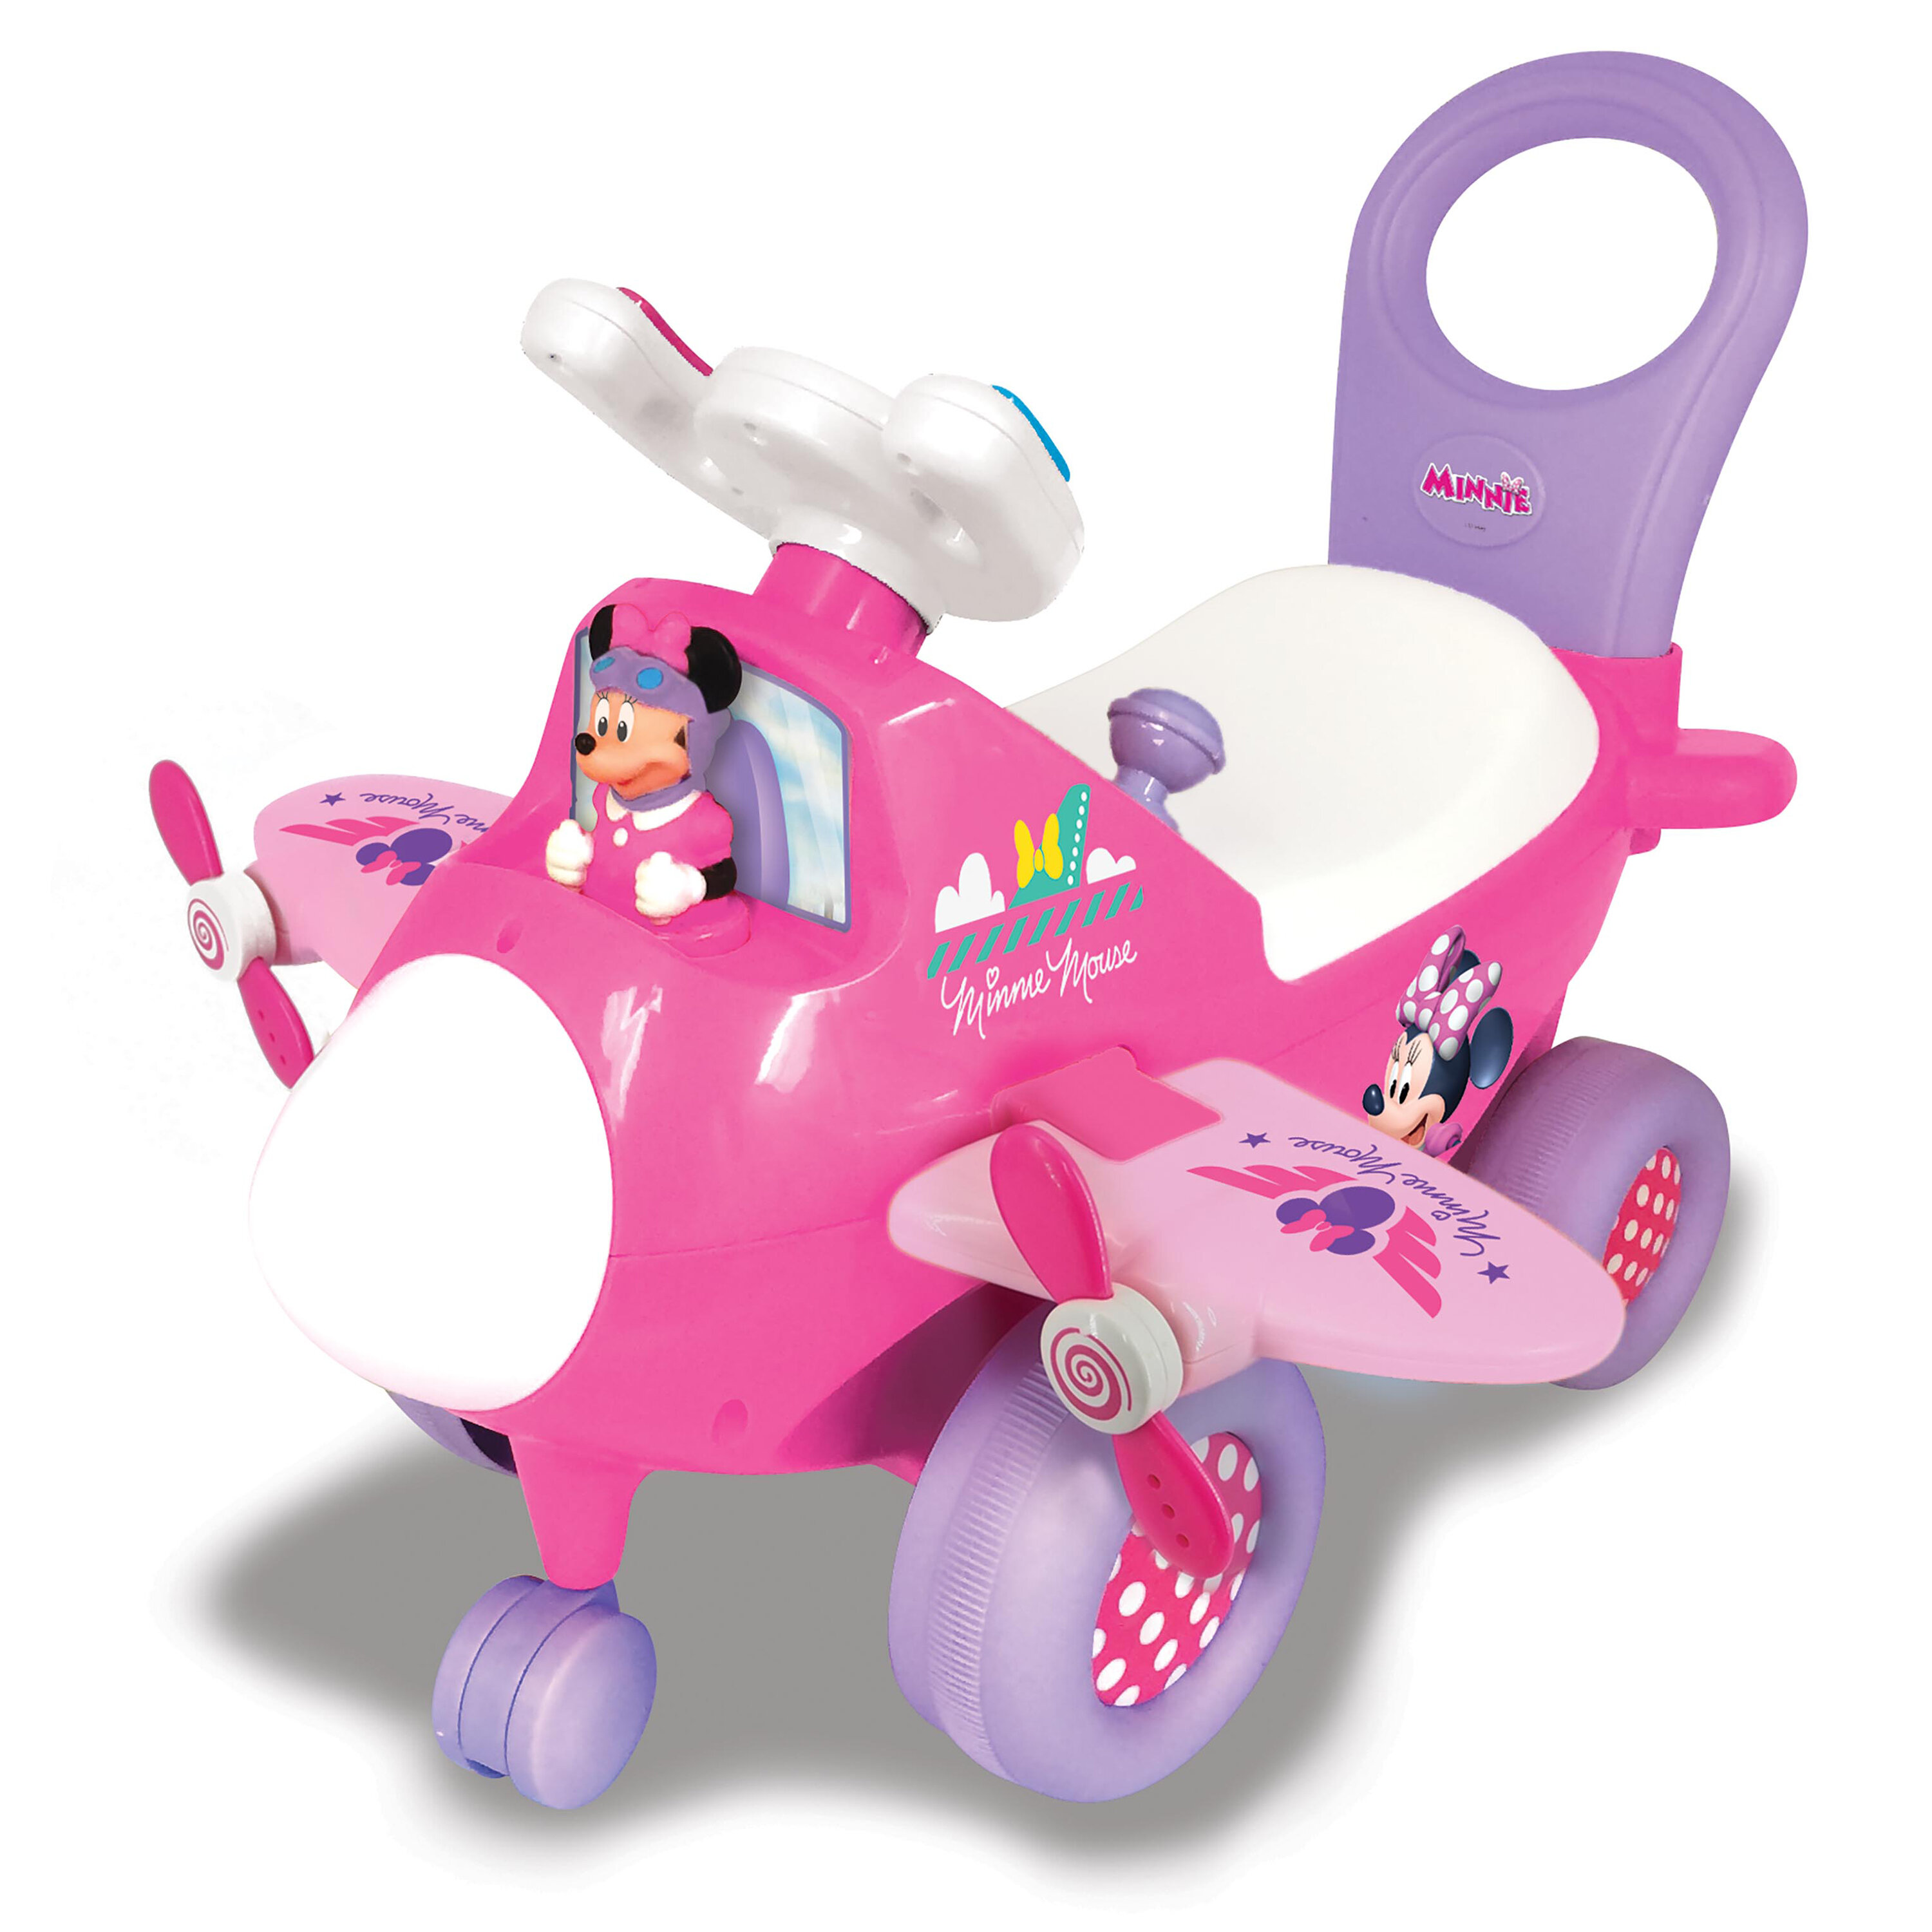 Lights N’ Sounds Minnie Mouse Activity Plane Ride-on's Ages 12-36 Months 